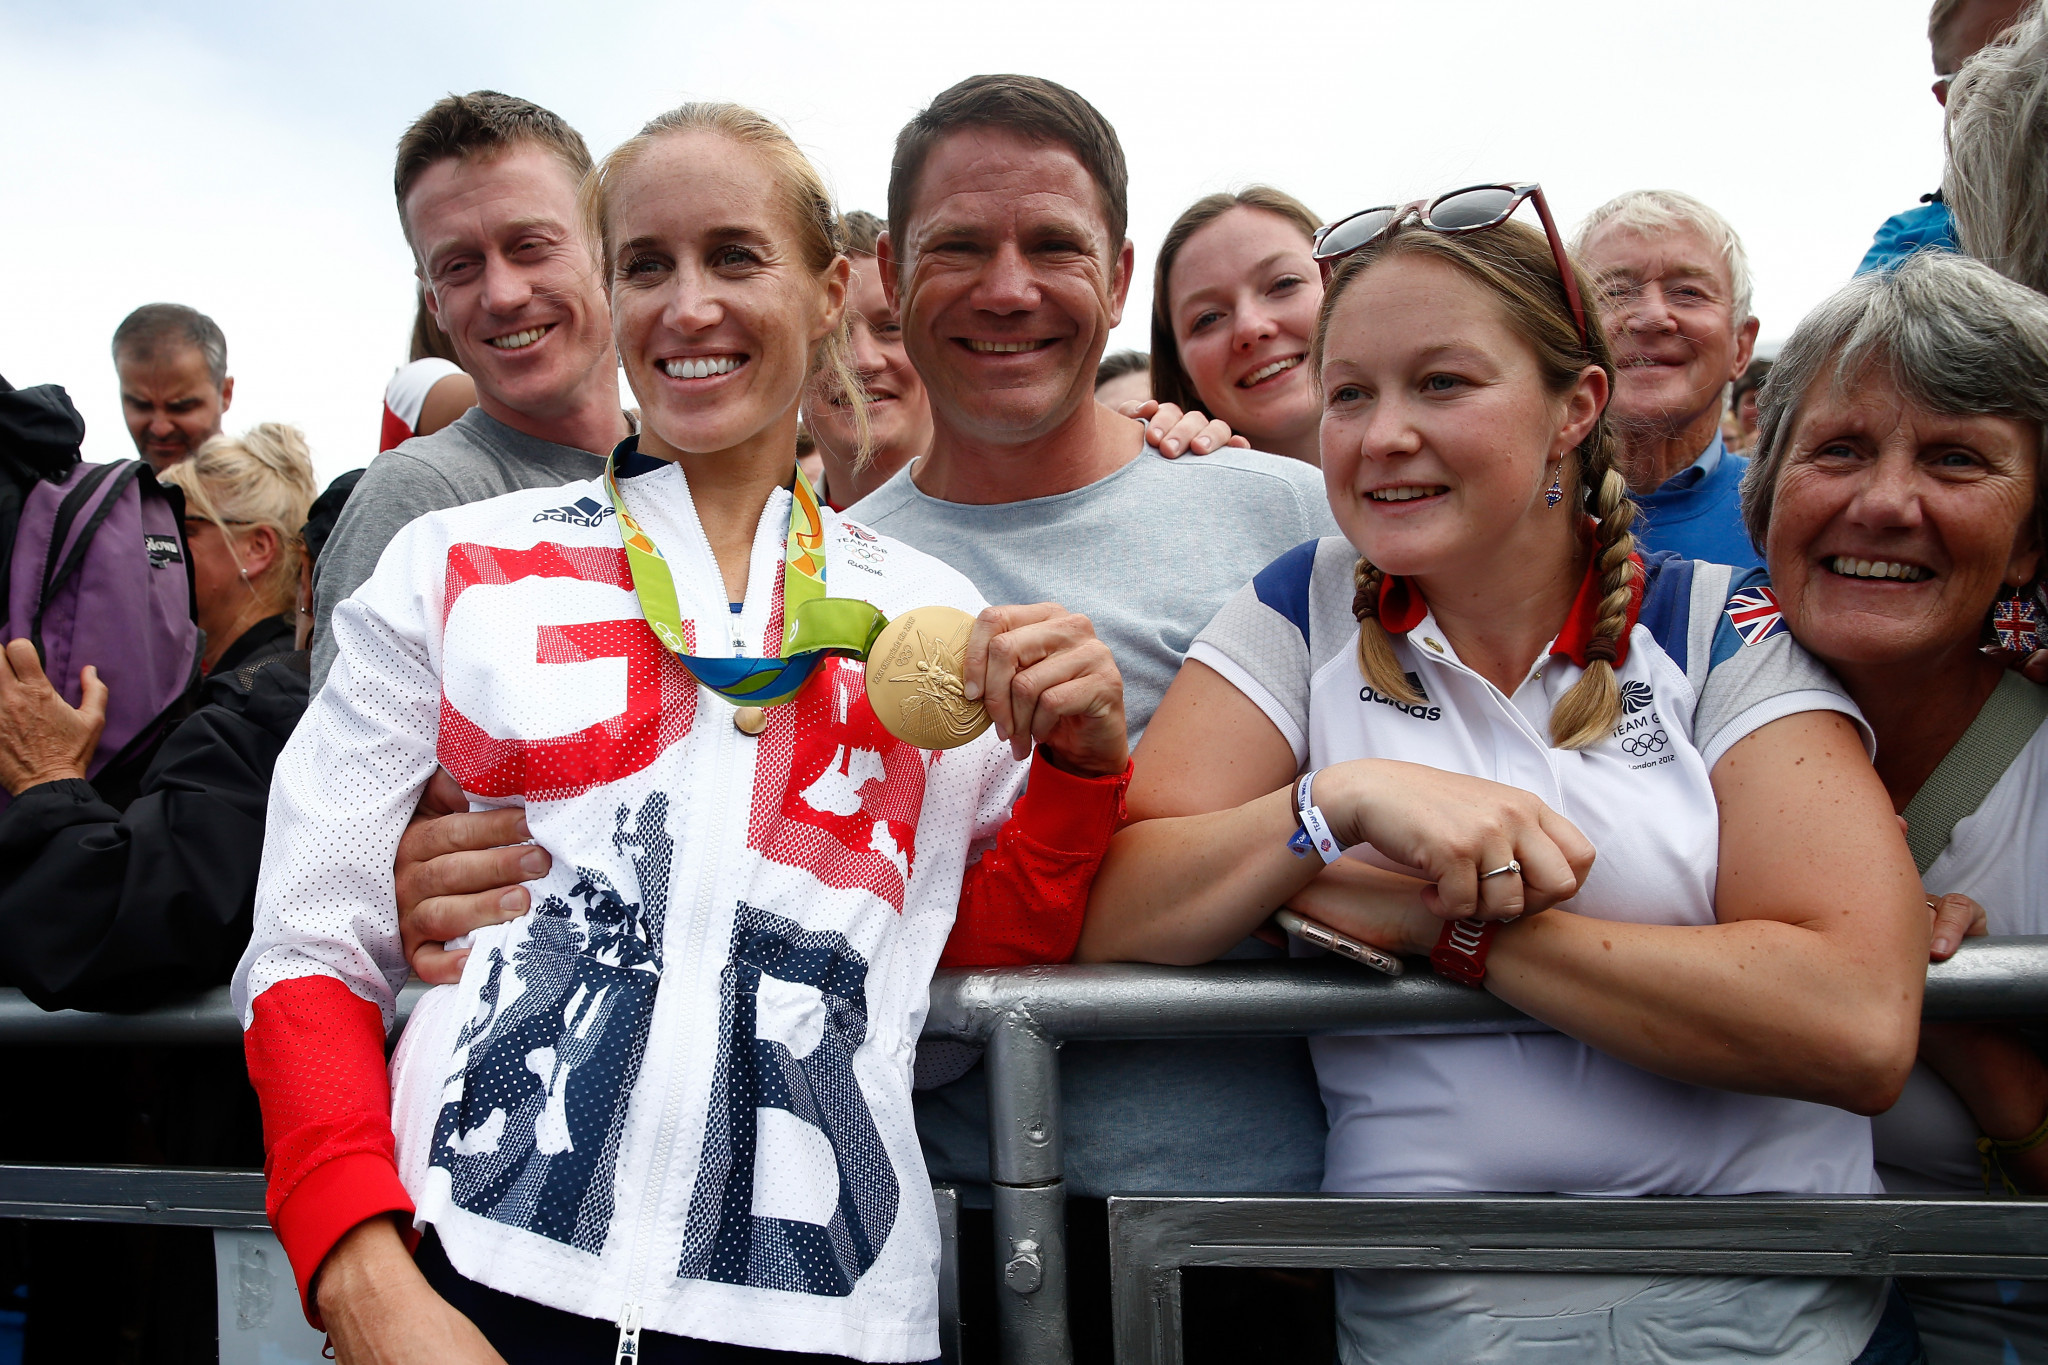 Helen Glover was the first mother to row for Britain at the Olympics at Tokyo 2020 after returning to the sport following three children with her husband, Steve Backshall, centre, a British explorer and television personality ©Getty Images